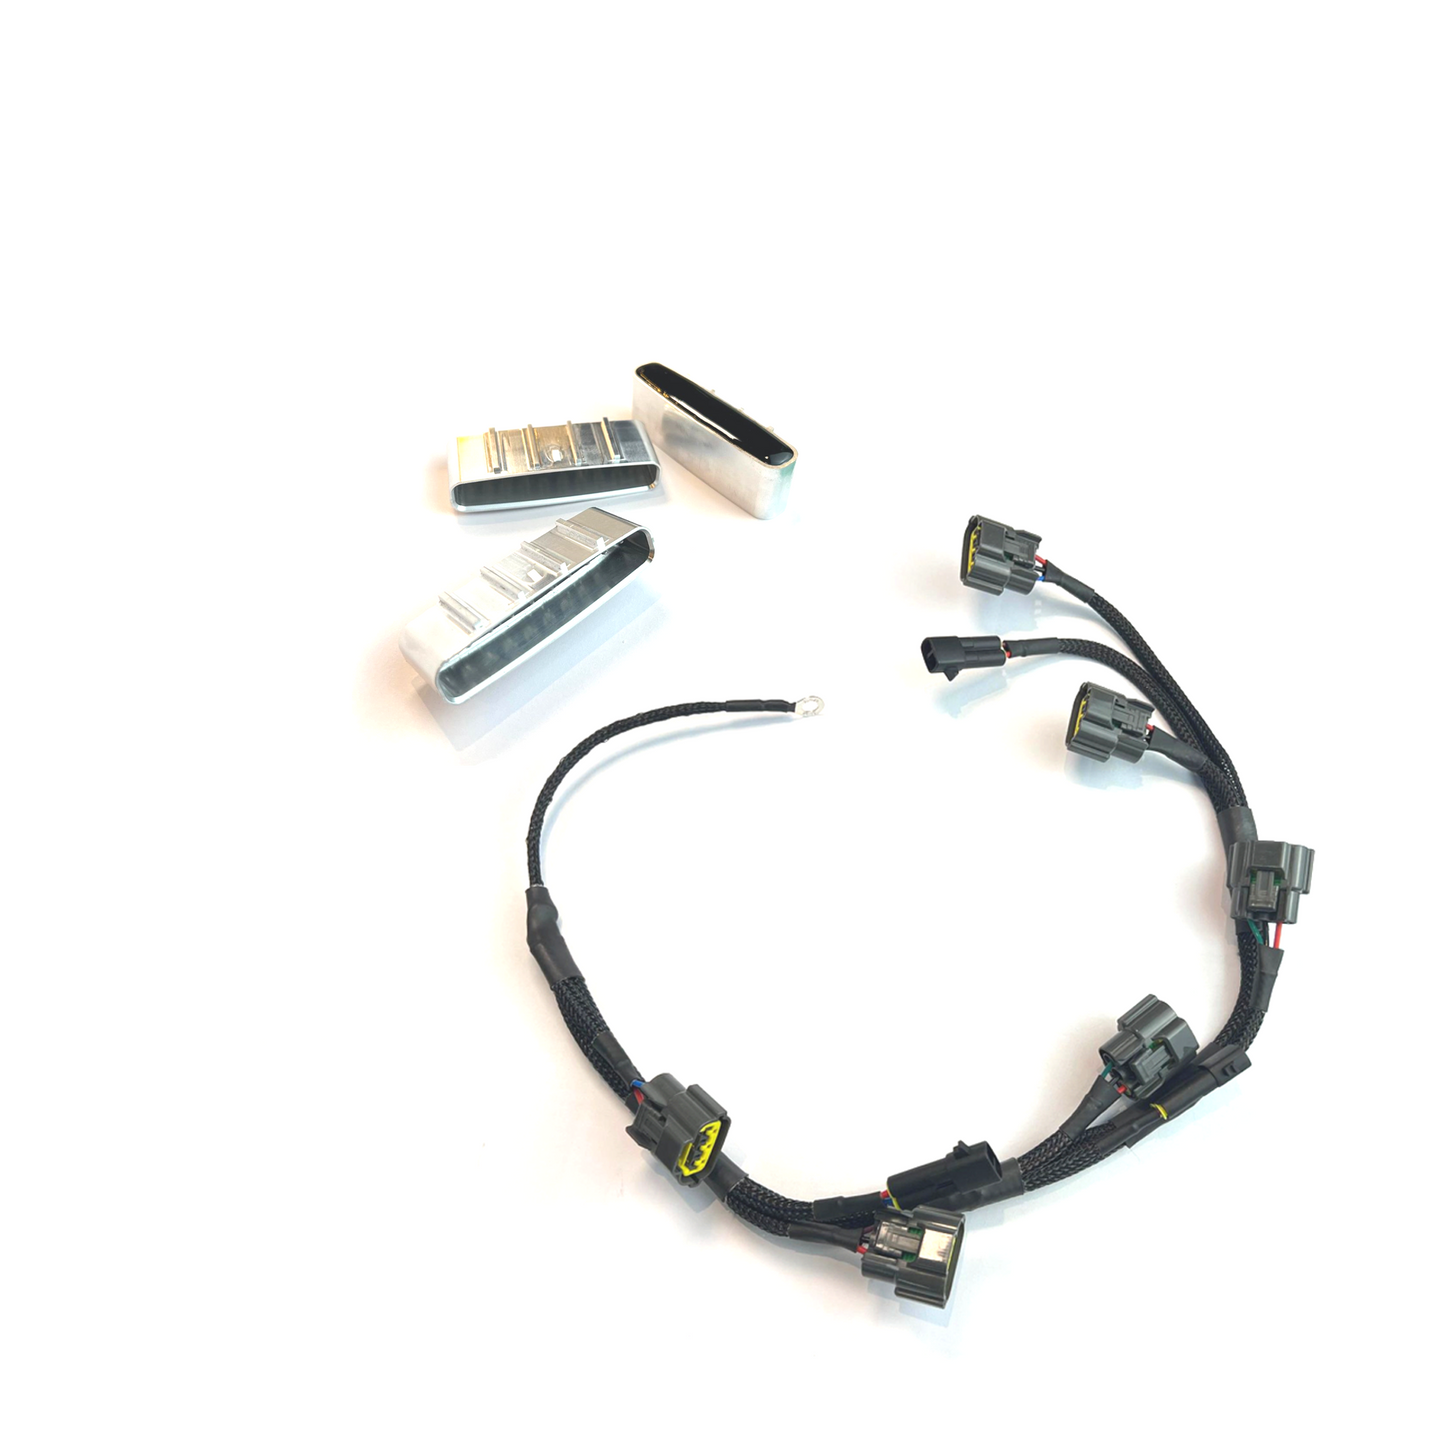 Platinum Racing Products - IGNITOR DELETE PATCH CONNECTOR TO SUIT TOYOTA 1JZGTE / 2JZGTE